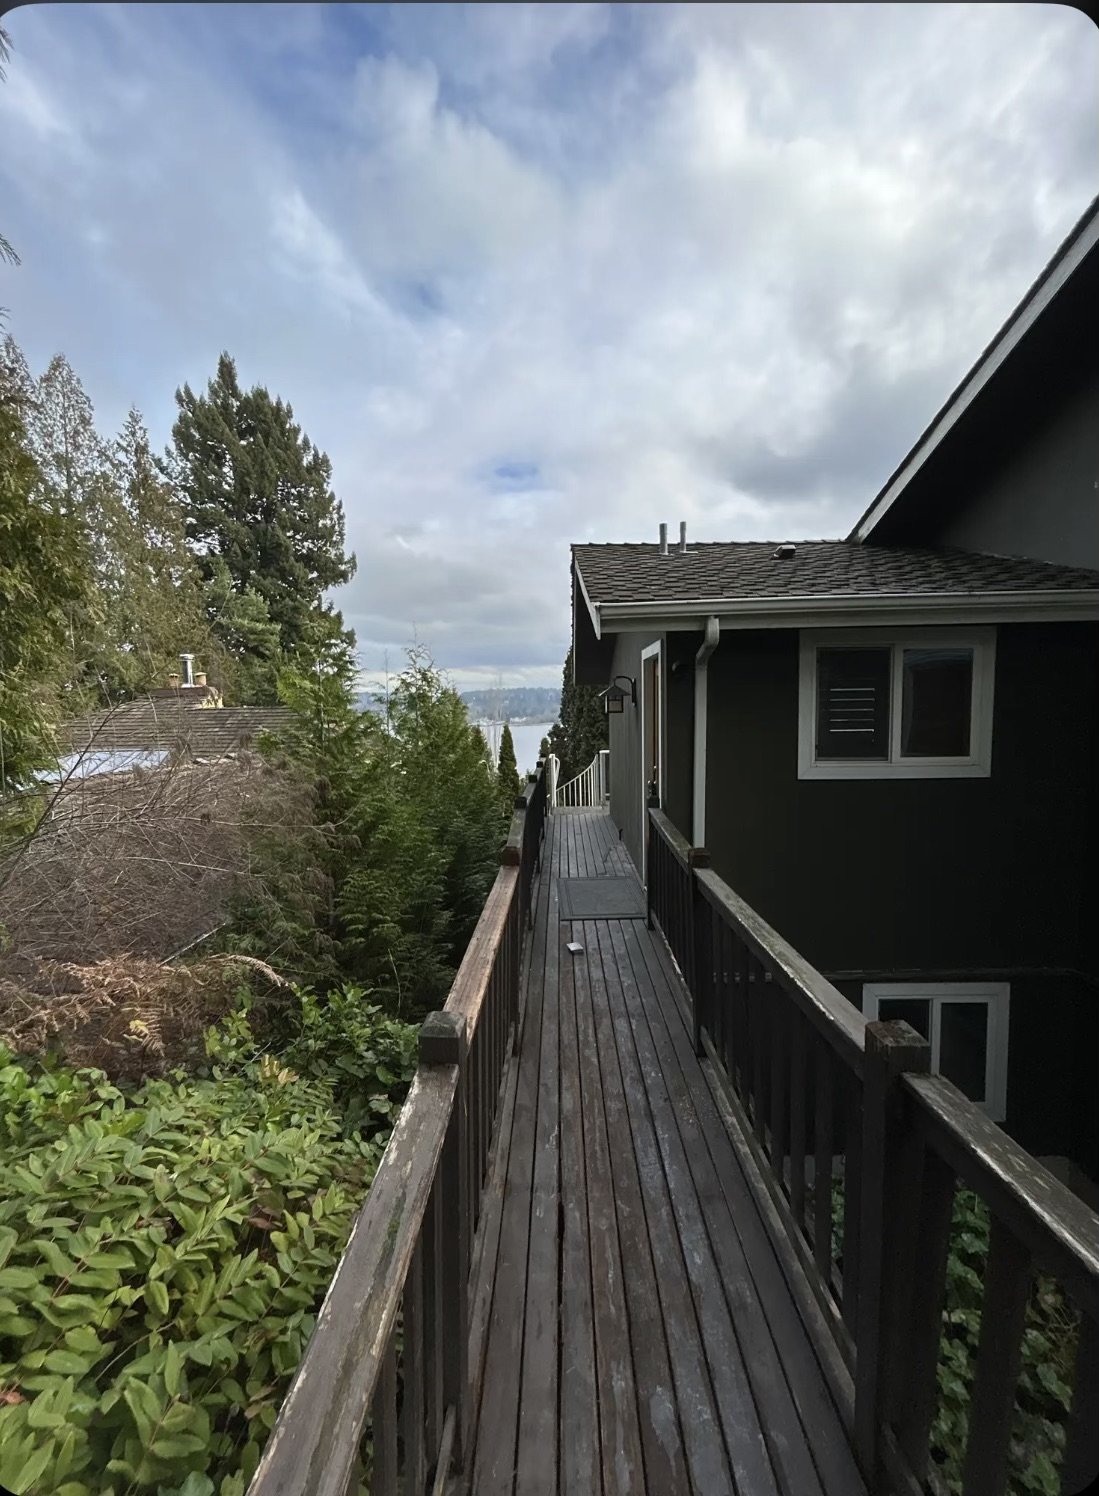 How to Repair This Rotten Home Entryway Deck Bellevue WA